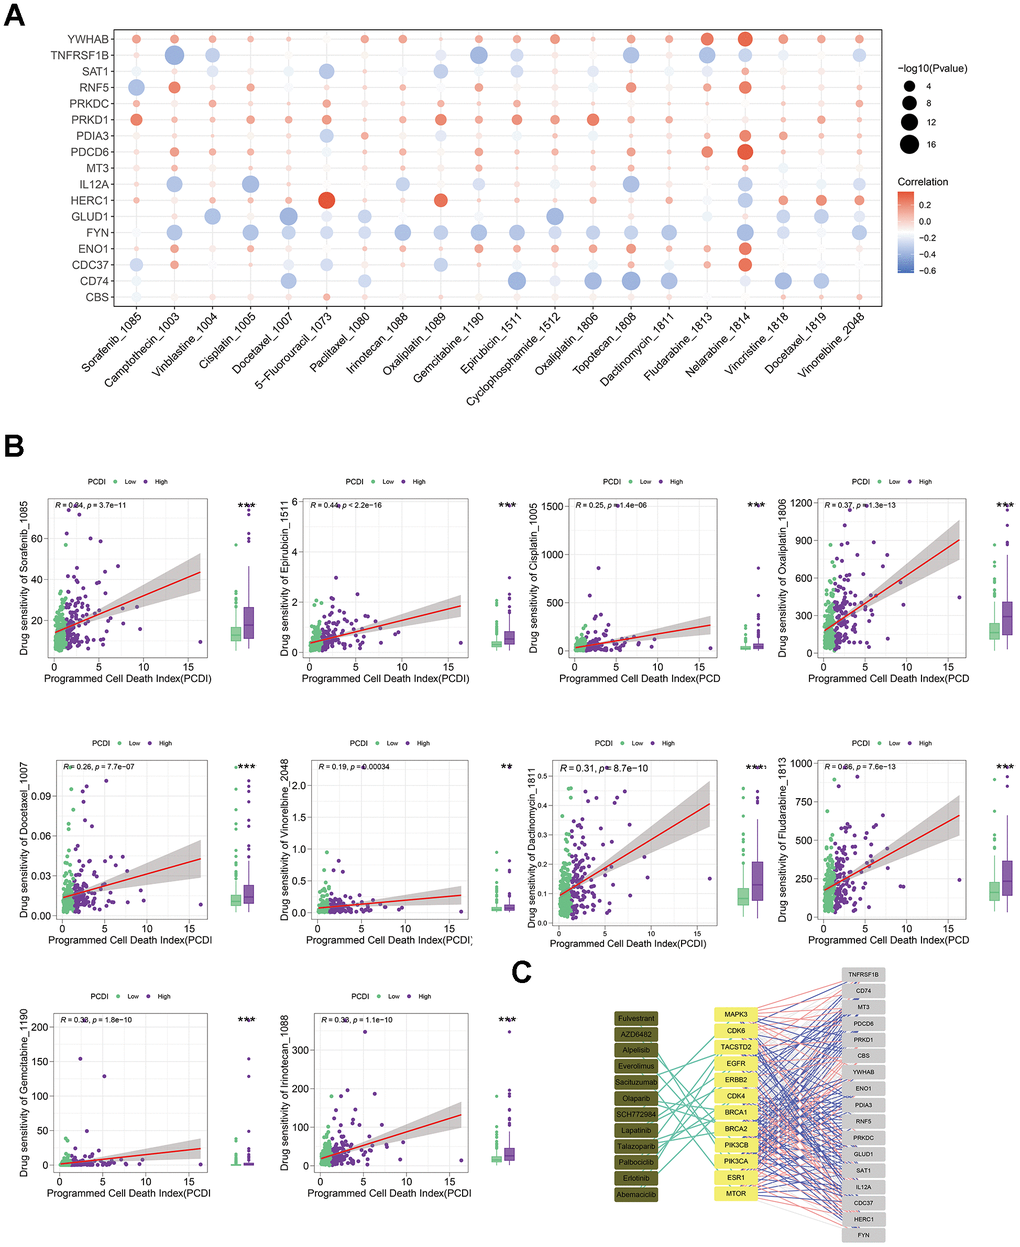 Evaluating the predictive capability of the programmed cell death index for drug sensitivity. (A) The correlation between the drug IC50 and PCD genes in model. (B) The correlation between the IC50 of drugs and PCDI values in patients with high- or low-PCDI, highlighting enhanced sensitivity to standard adjuvant chemotherapy in low PCDI LIHC patients. (C) The association between model genes and established targets for the treatment of LIHC.